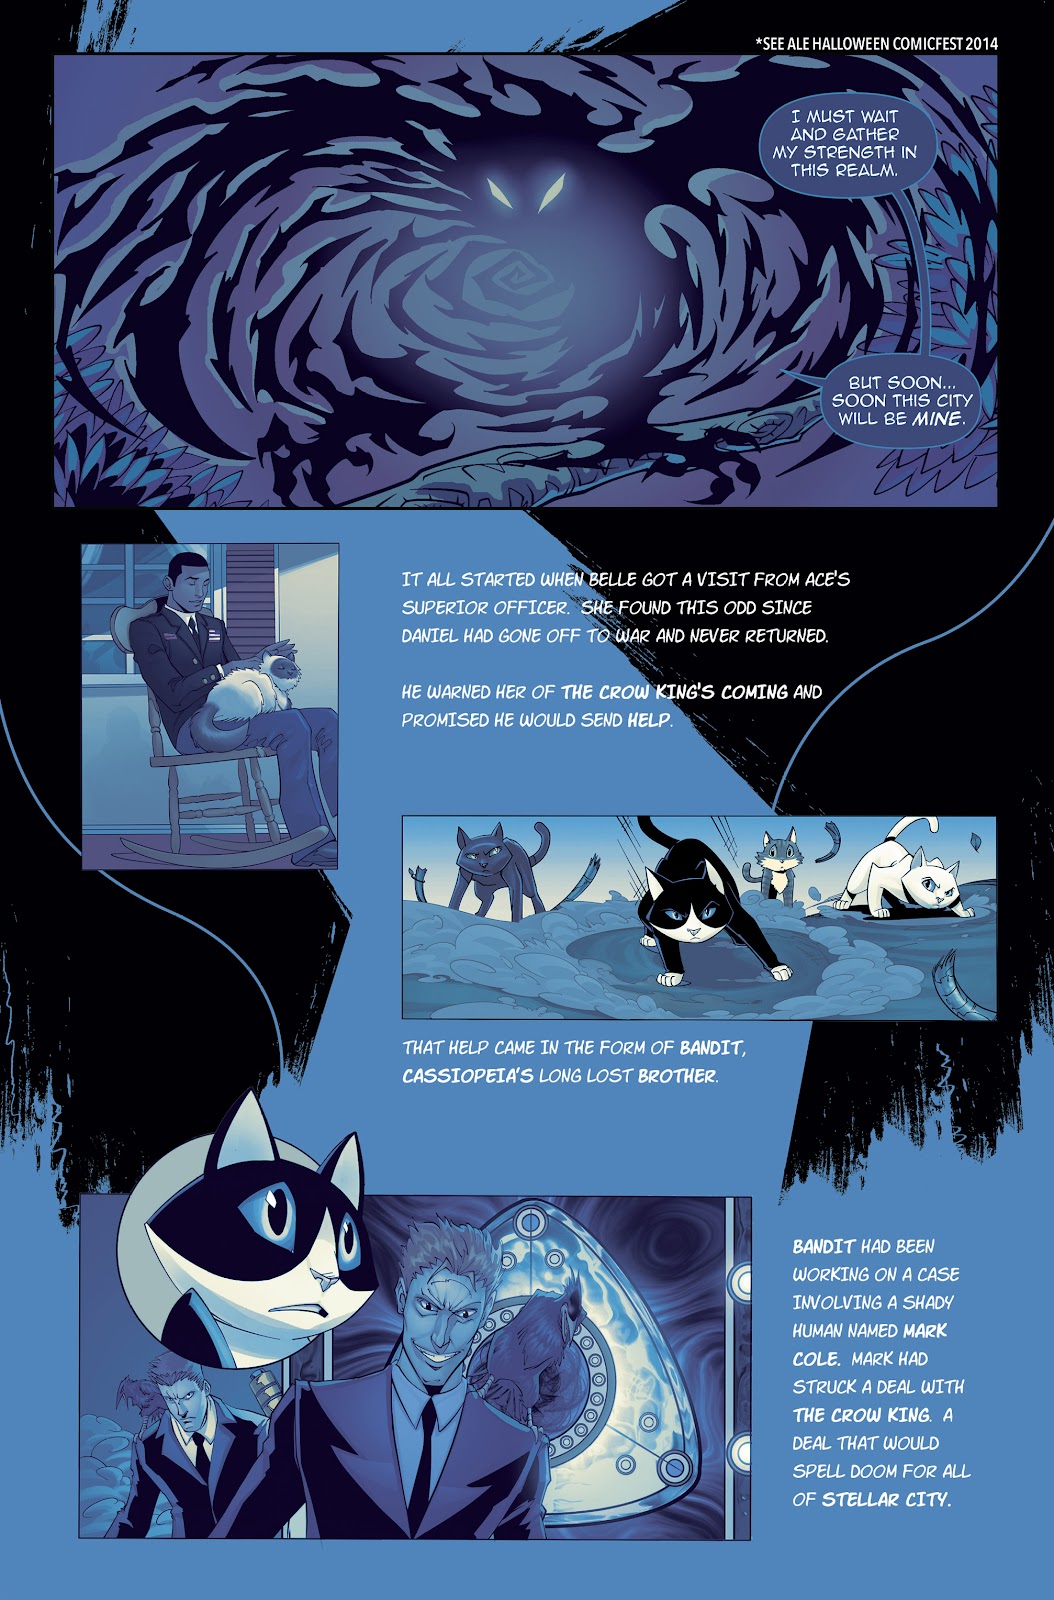 Hero Cats: Midnight Over Stellar City Vol. 2 issue 1 - Page 25